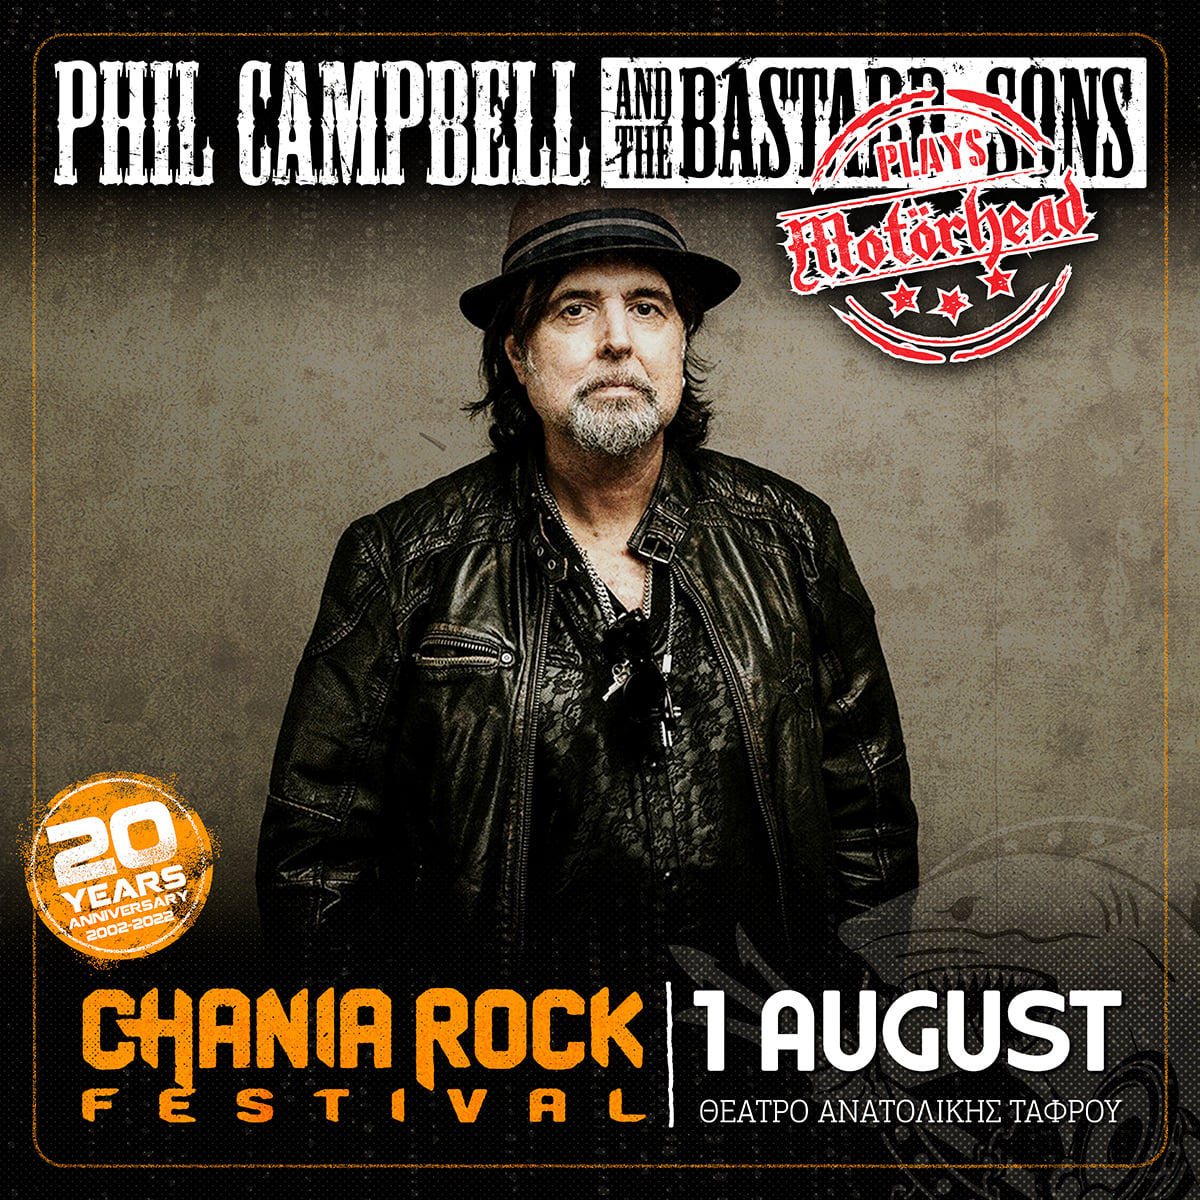 Phil Campbell and the Bastard Sons - Chania Rock Festival 2022